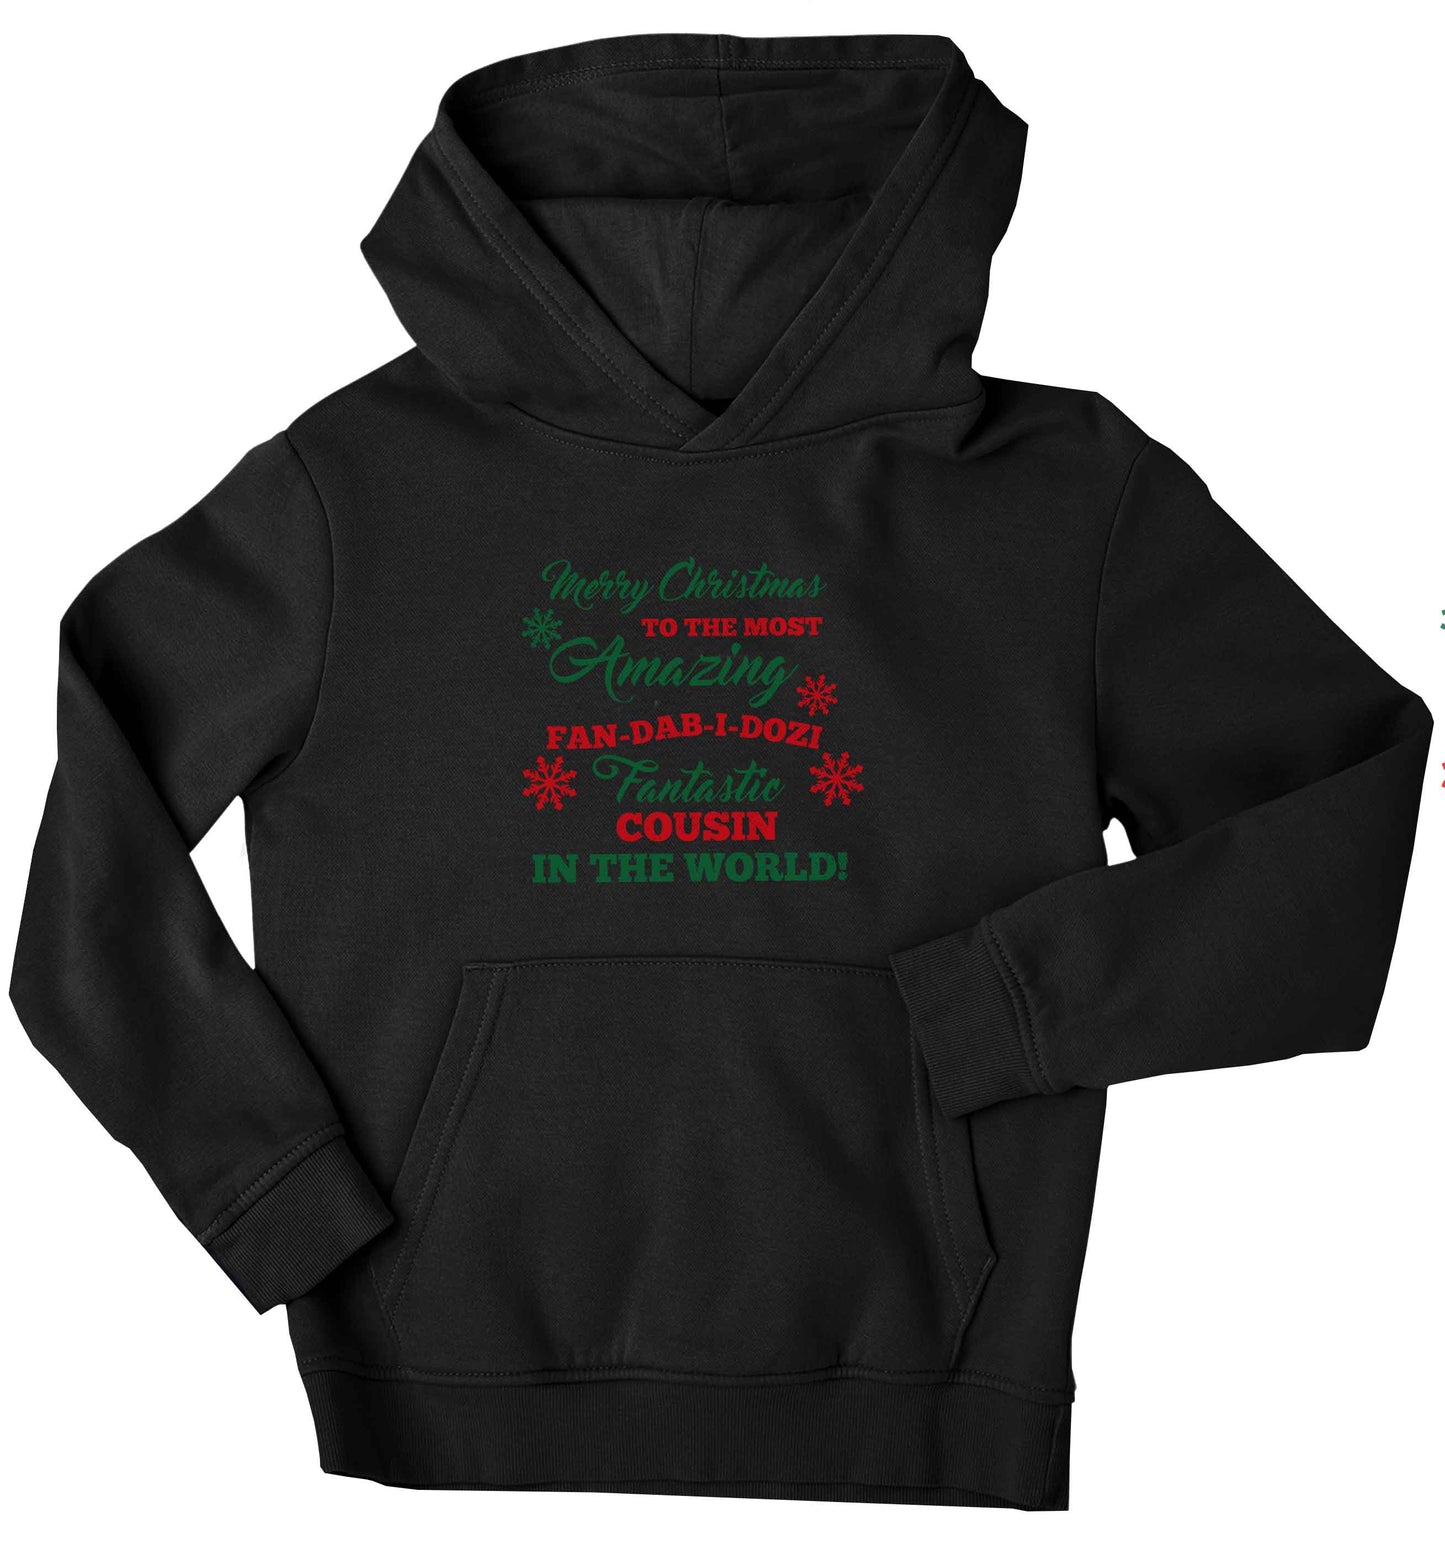 Merry Christmas to the most amazing fan-dab-i-dozi fantasic Cousin in the world children's black hoodie 12-13 Years